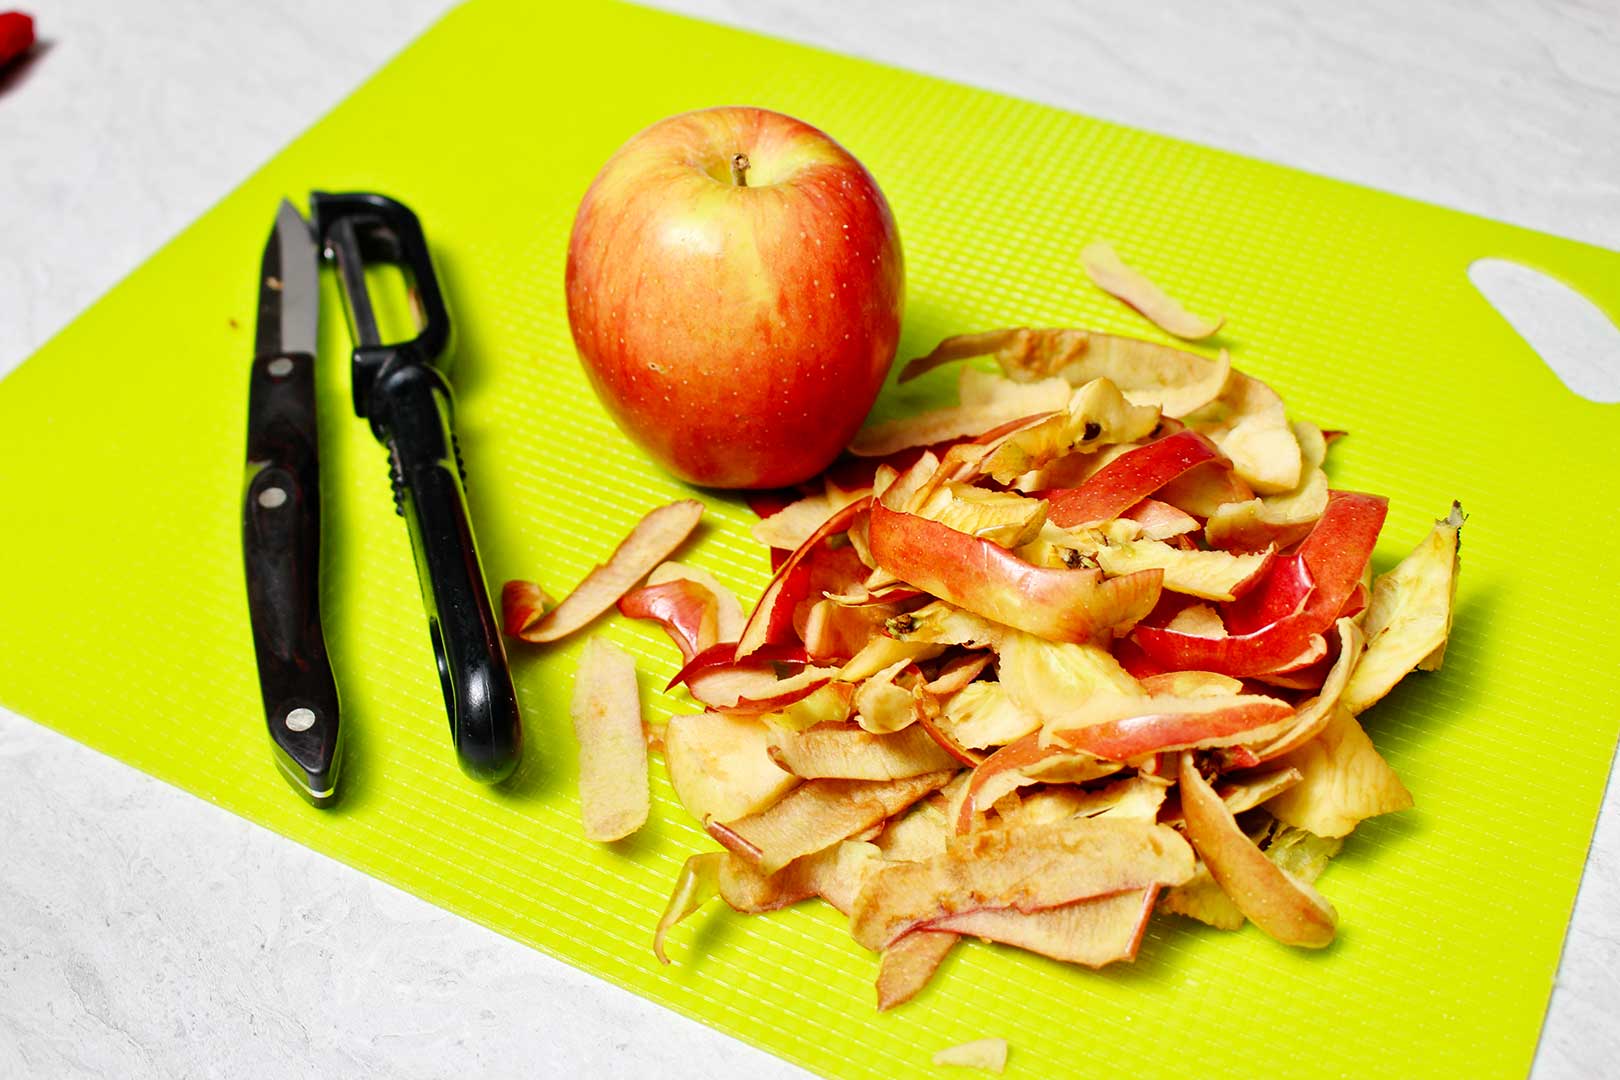 Apple and apple peels on a neon green plastic cutting board with a knife and peeler next to them.